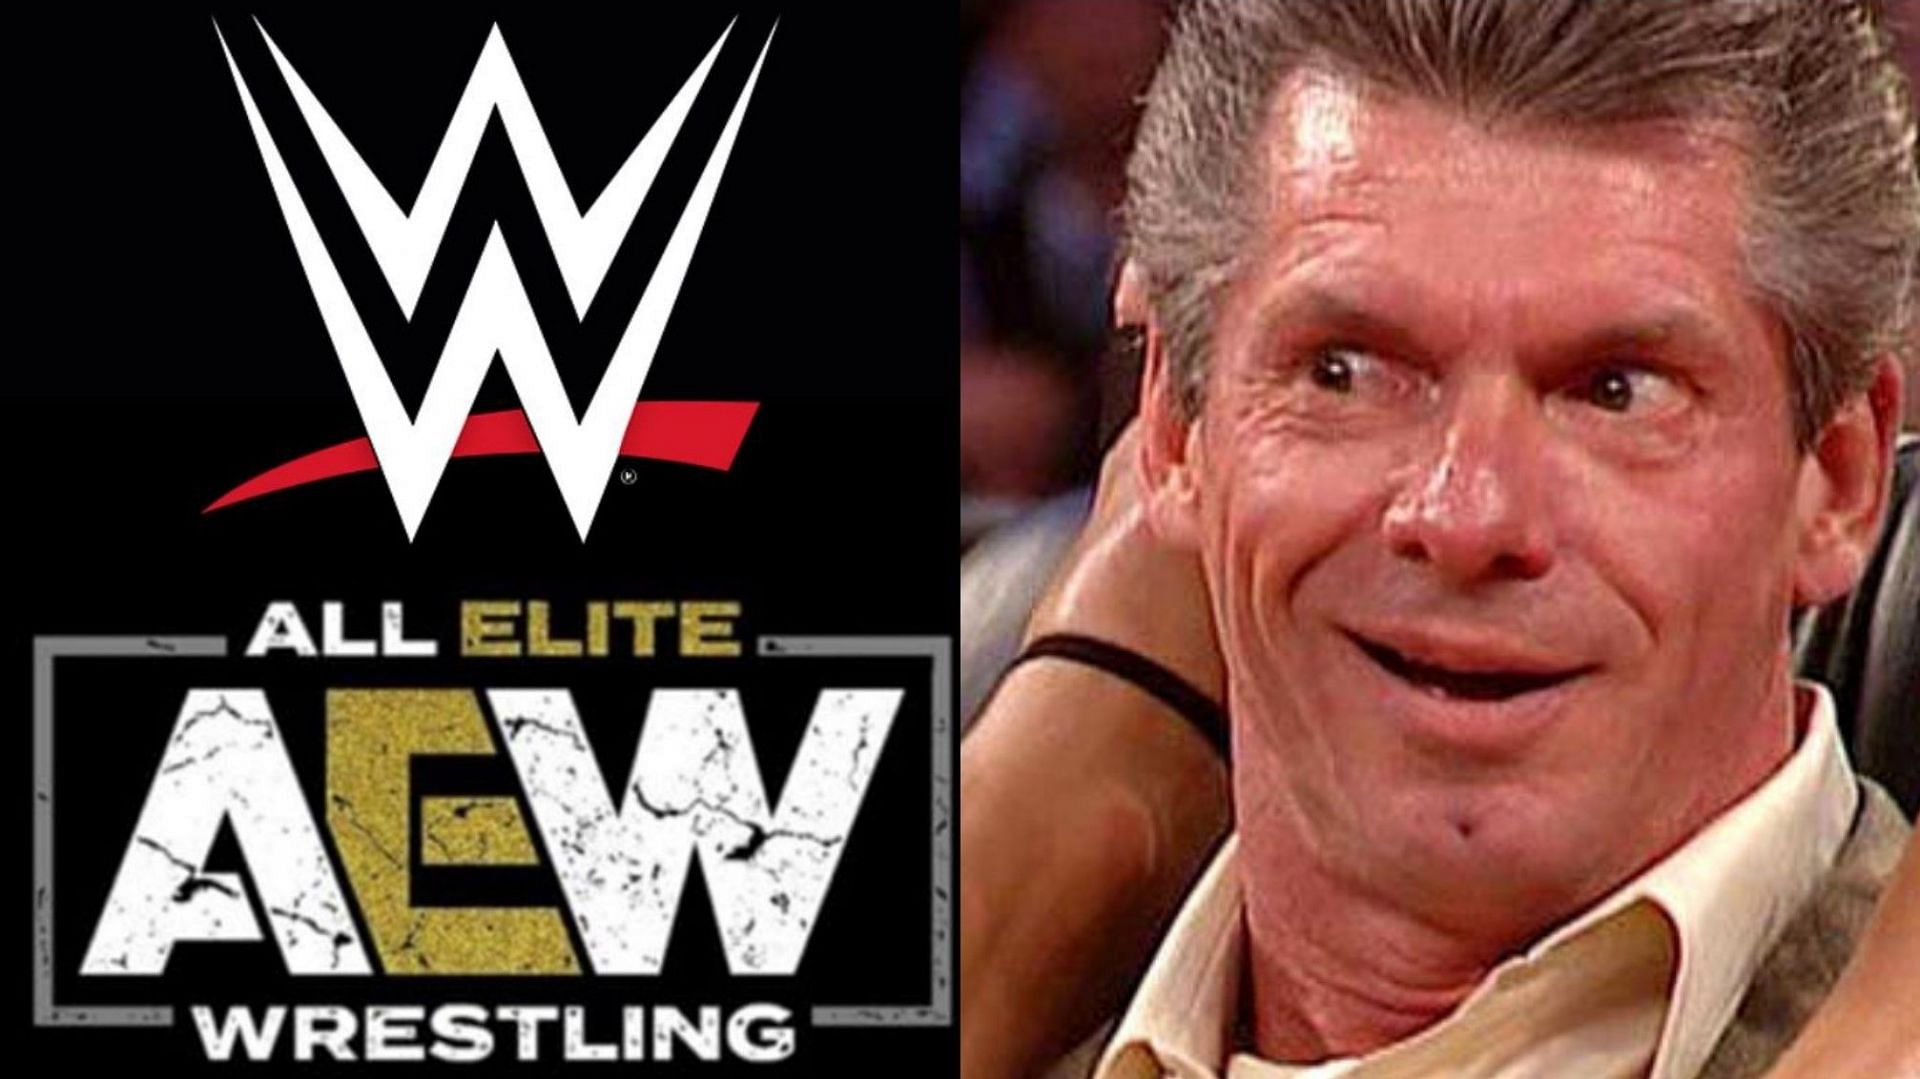 A wrestling manager thinks Vince McMahon will be interested in a top AEW star!